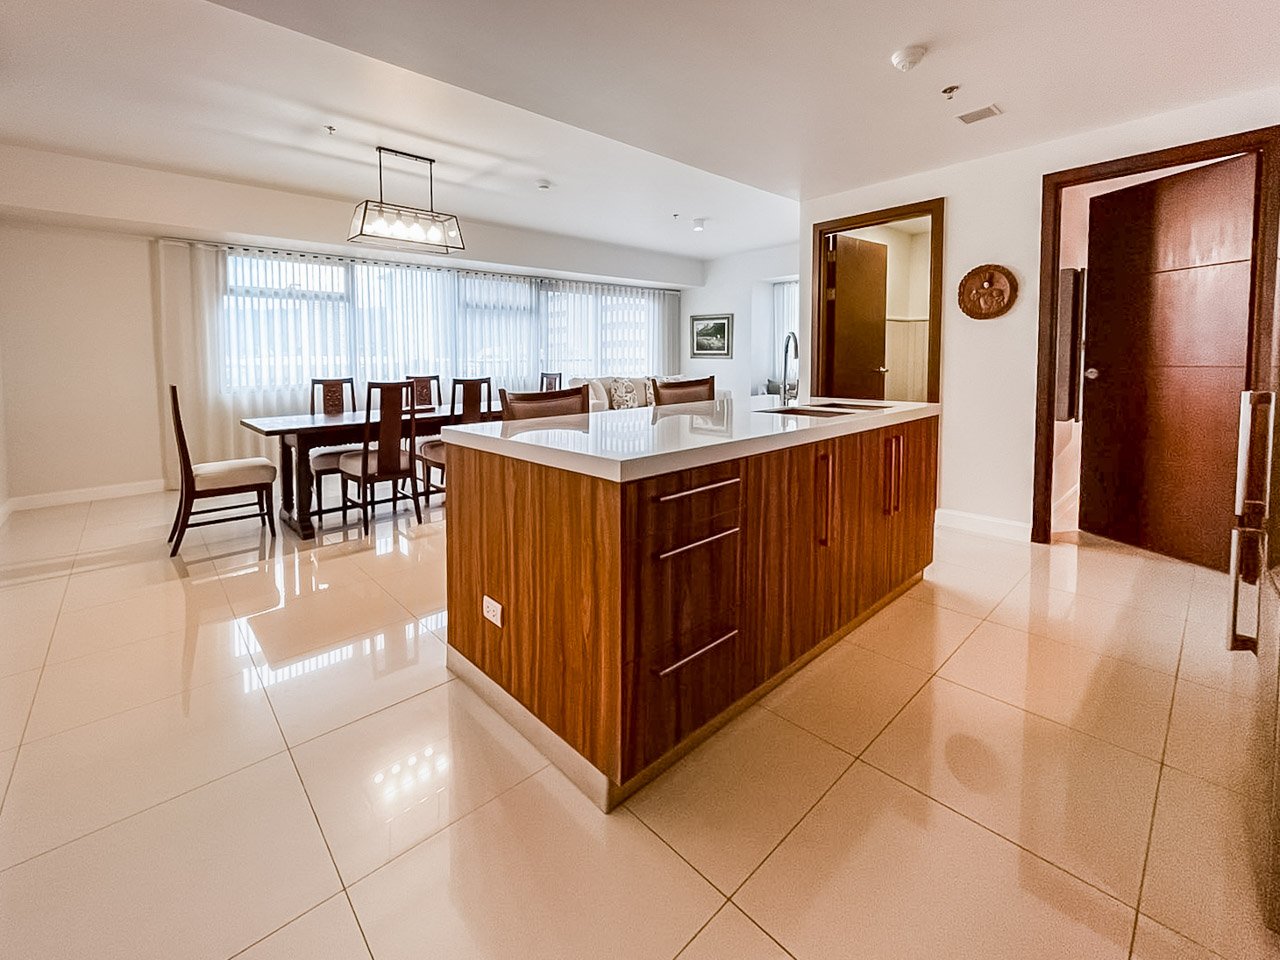 RCALC9 Furnished 2 Bedroom Condo for Rent in Cebu Business Park - 1